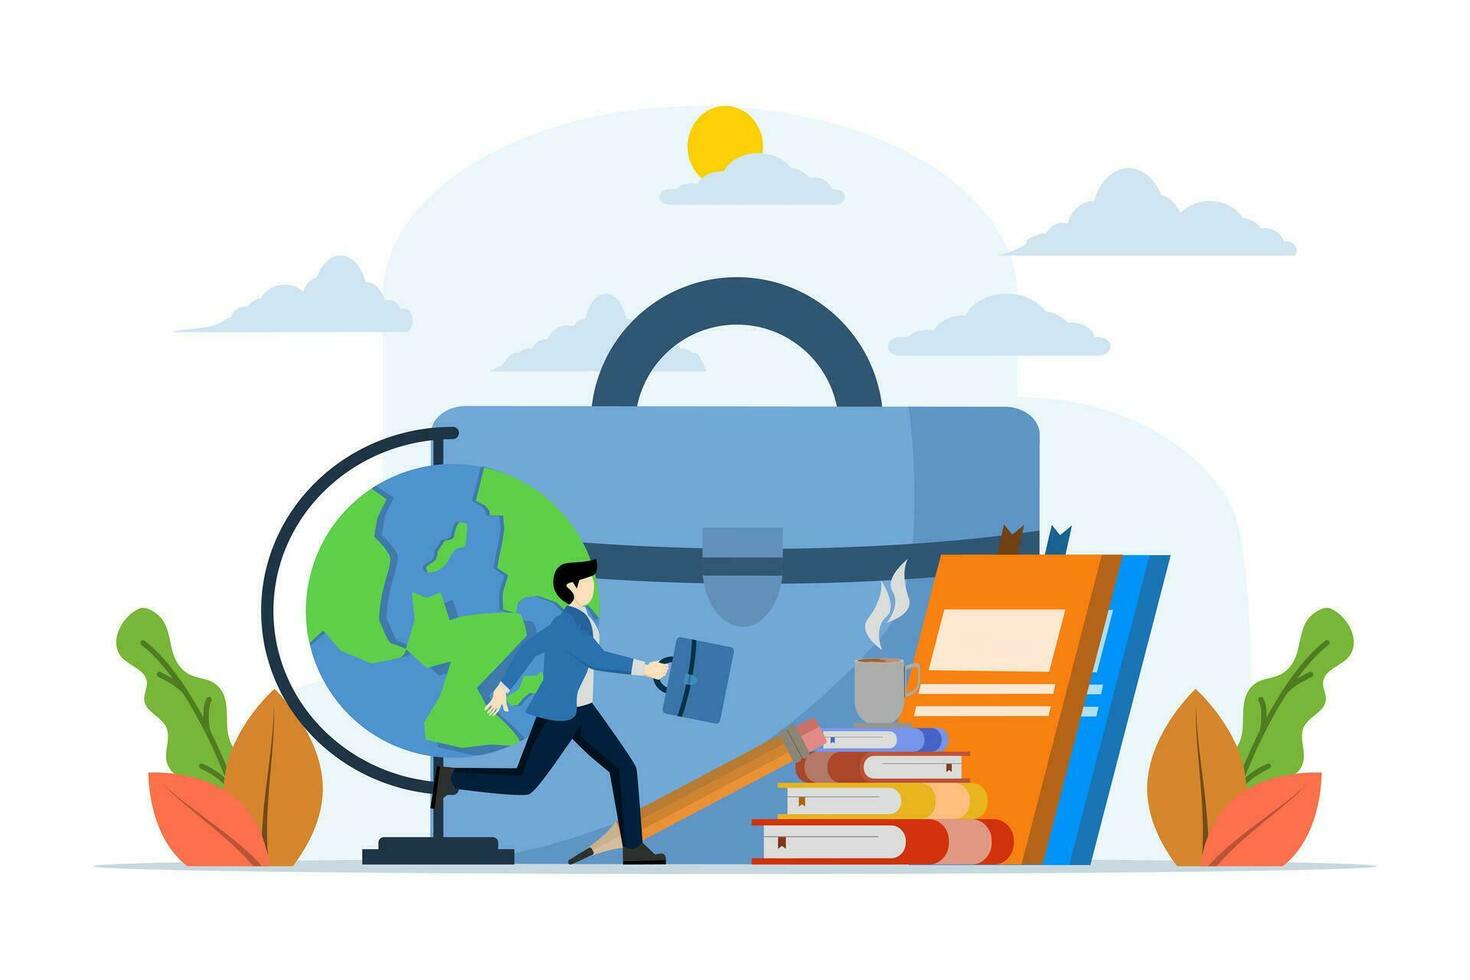 concept of returning to work, bags and books, office, business people, education, rest time is over, business people return to work after finishing their break. flat vector illustration on background.